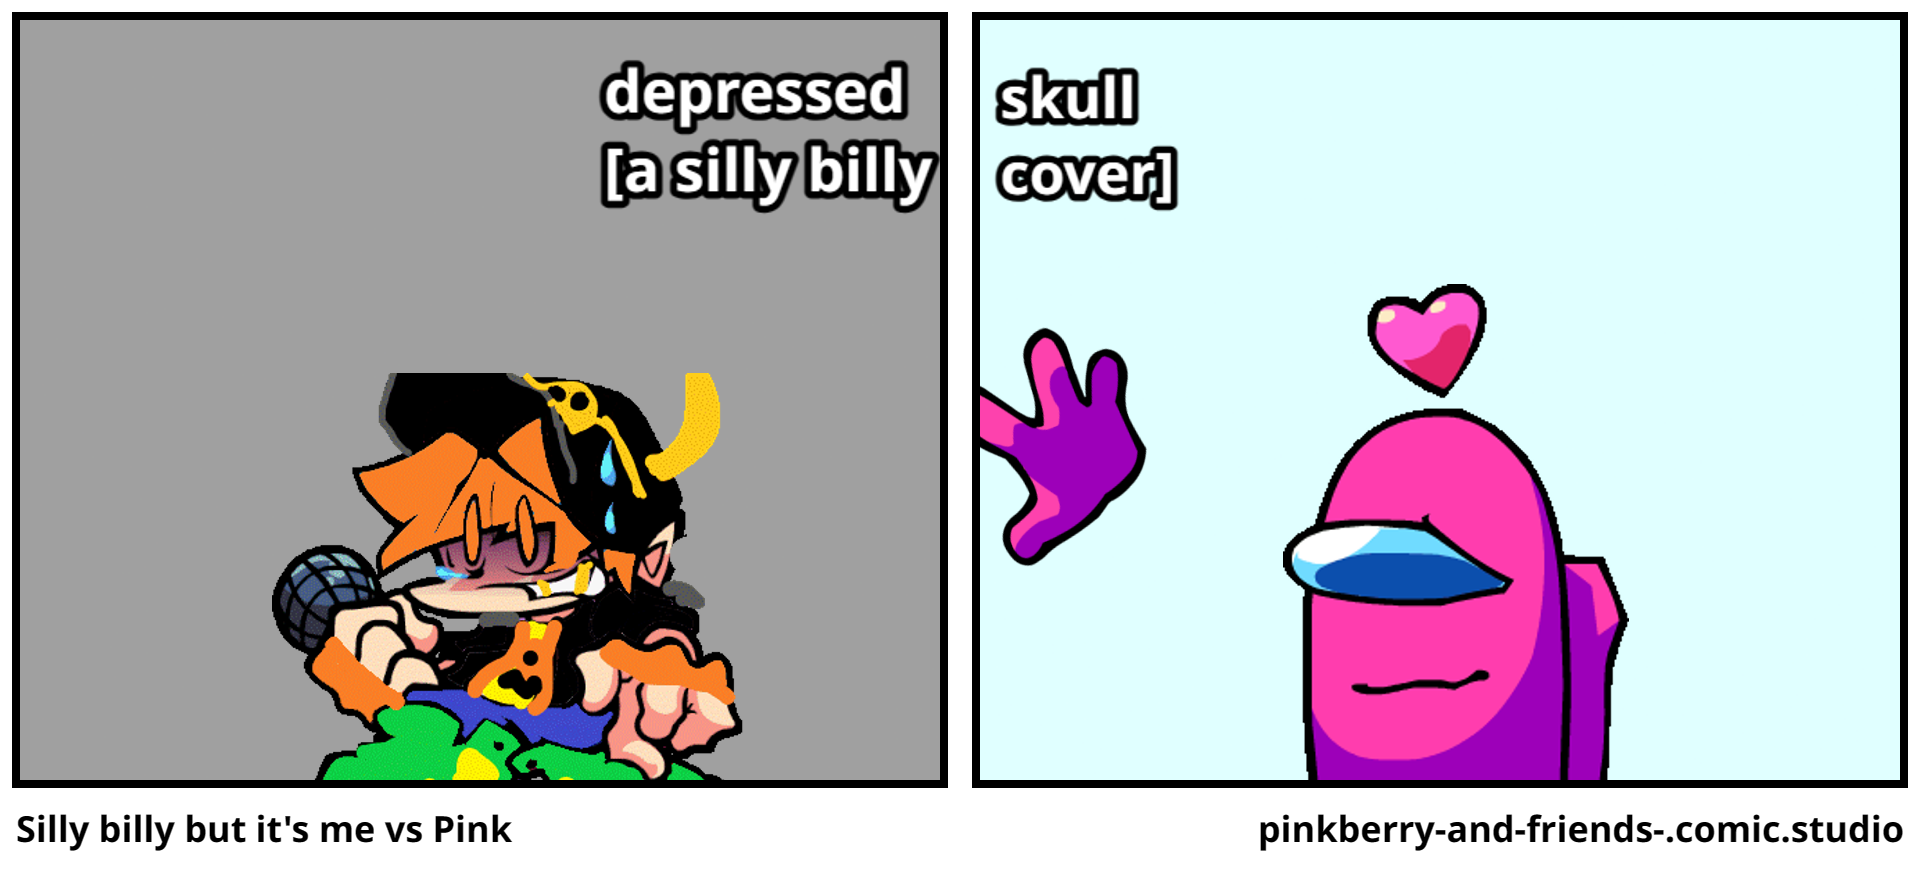 Silly billy but it's me vs Pink